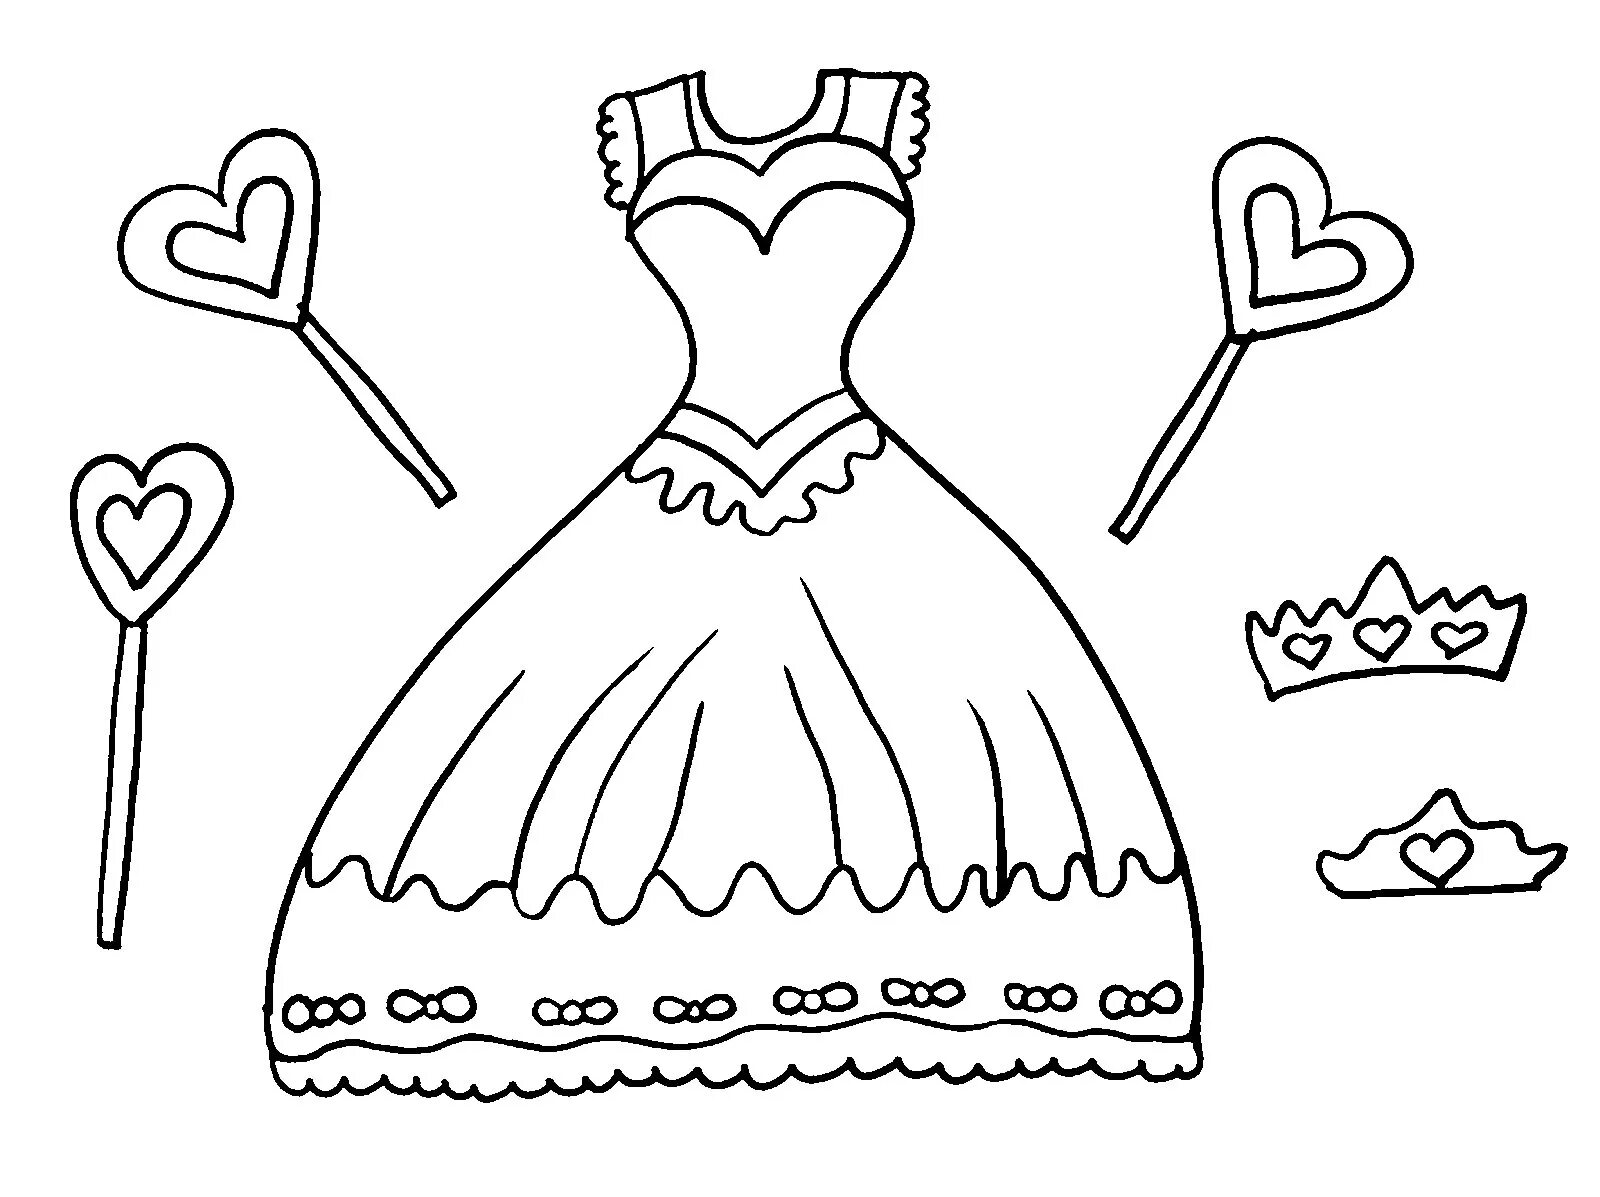 Funky dress coloring page